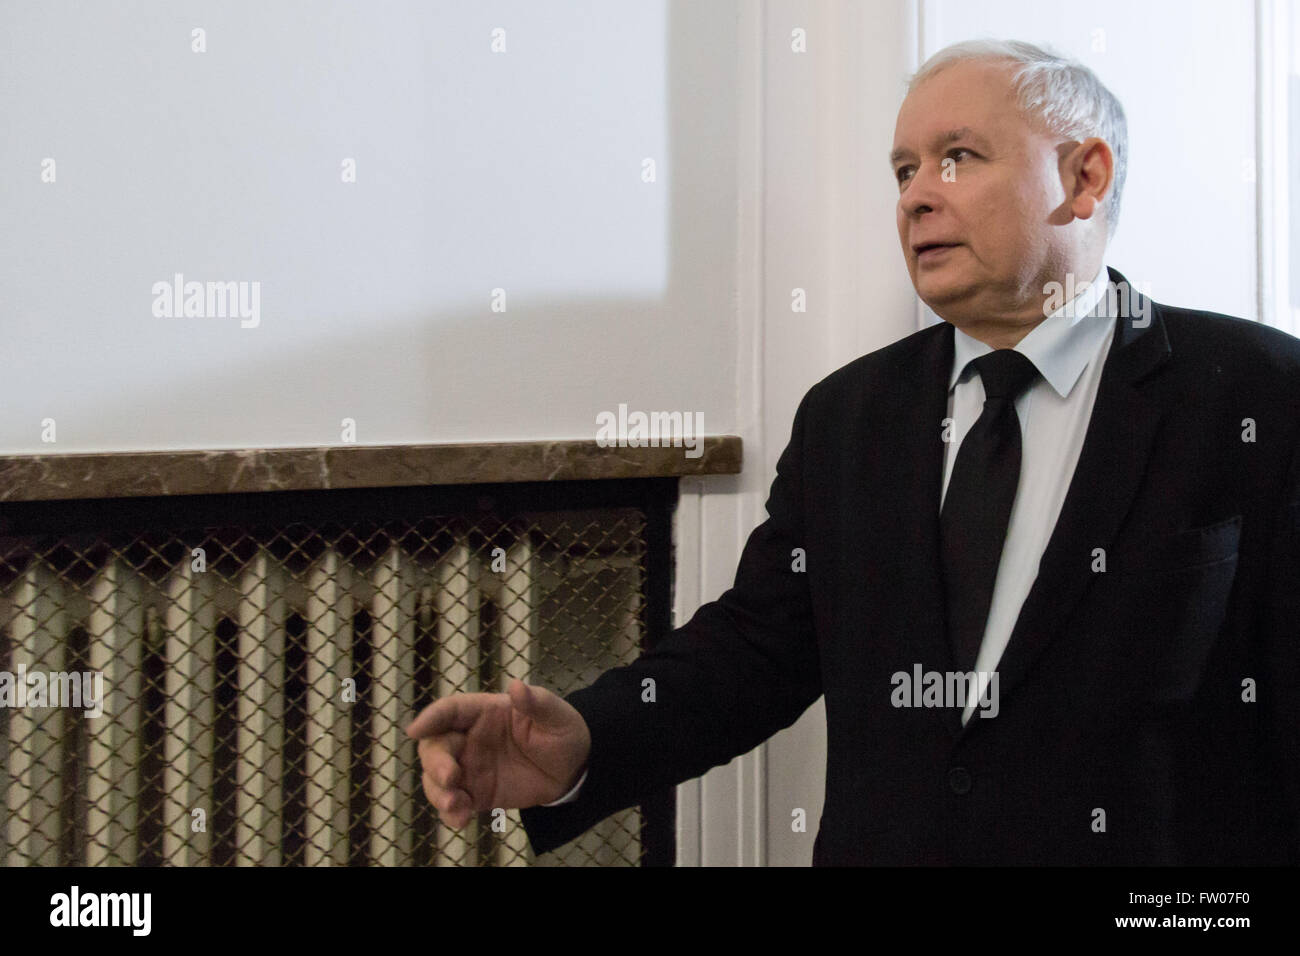 Warsaw, Poland. 31st Mar, 2016. Leader of Law and Justice party (PiS), Jaroslaw Kaczynski after meeting of leaders of eight polish political parties in a bid to resolve Poland's constitutional crisis. © Mateusz Wlodarczyk/Pacific Press/Alamy Live News Stock Photo